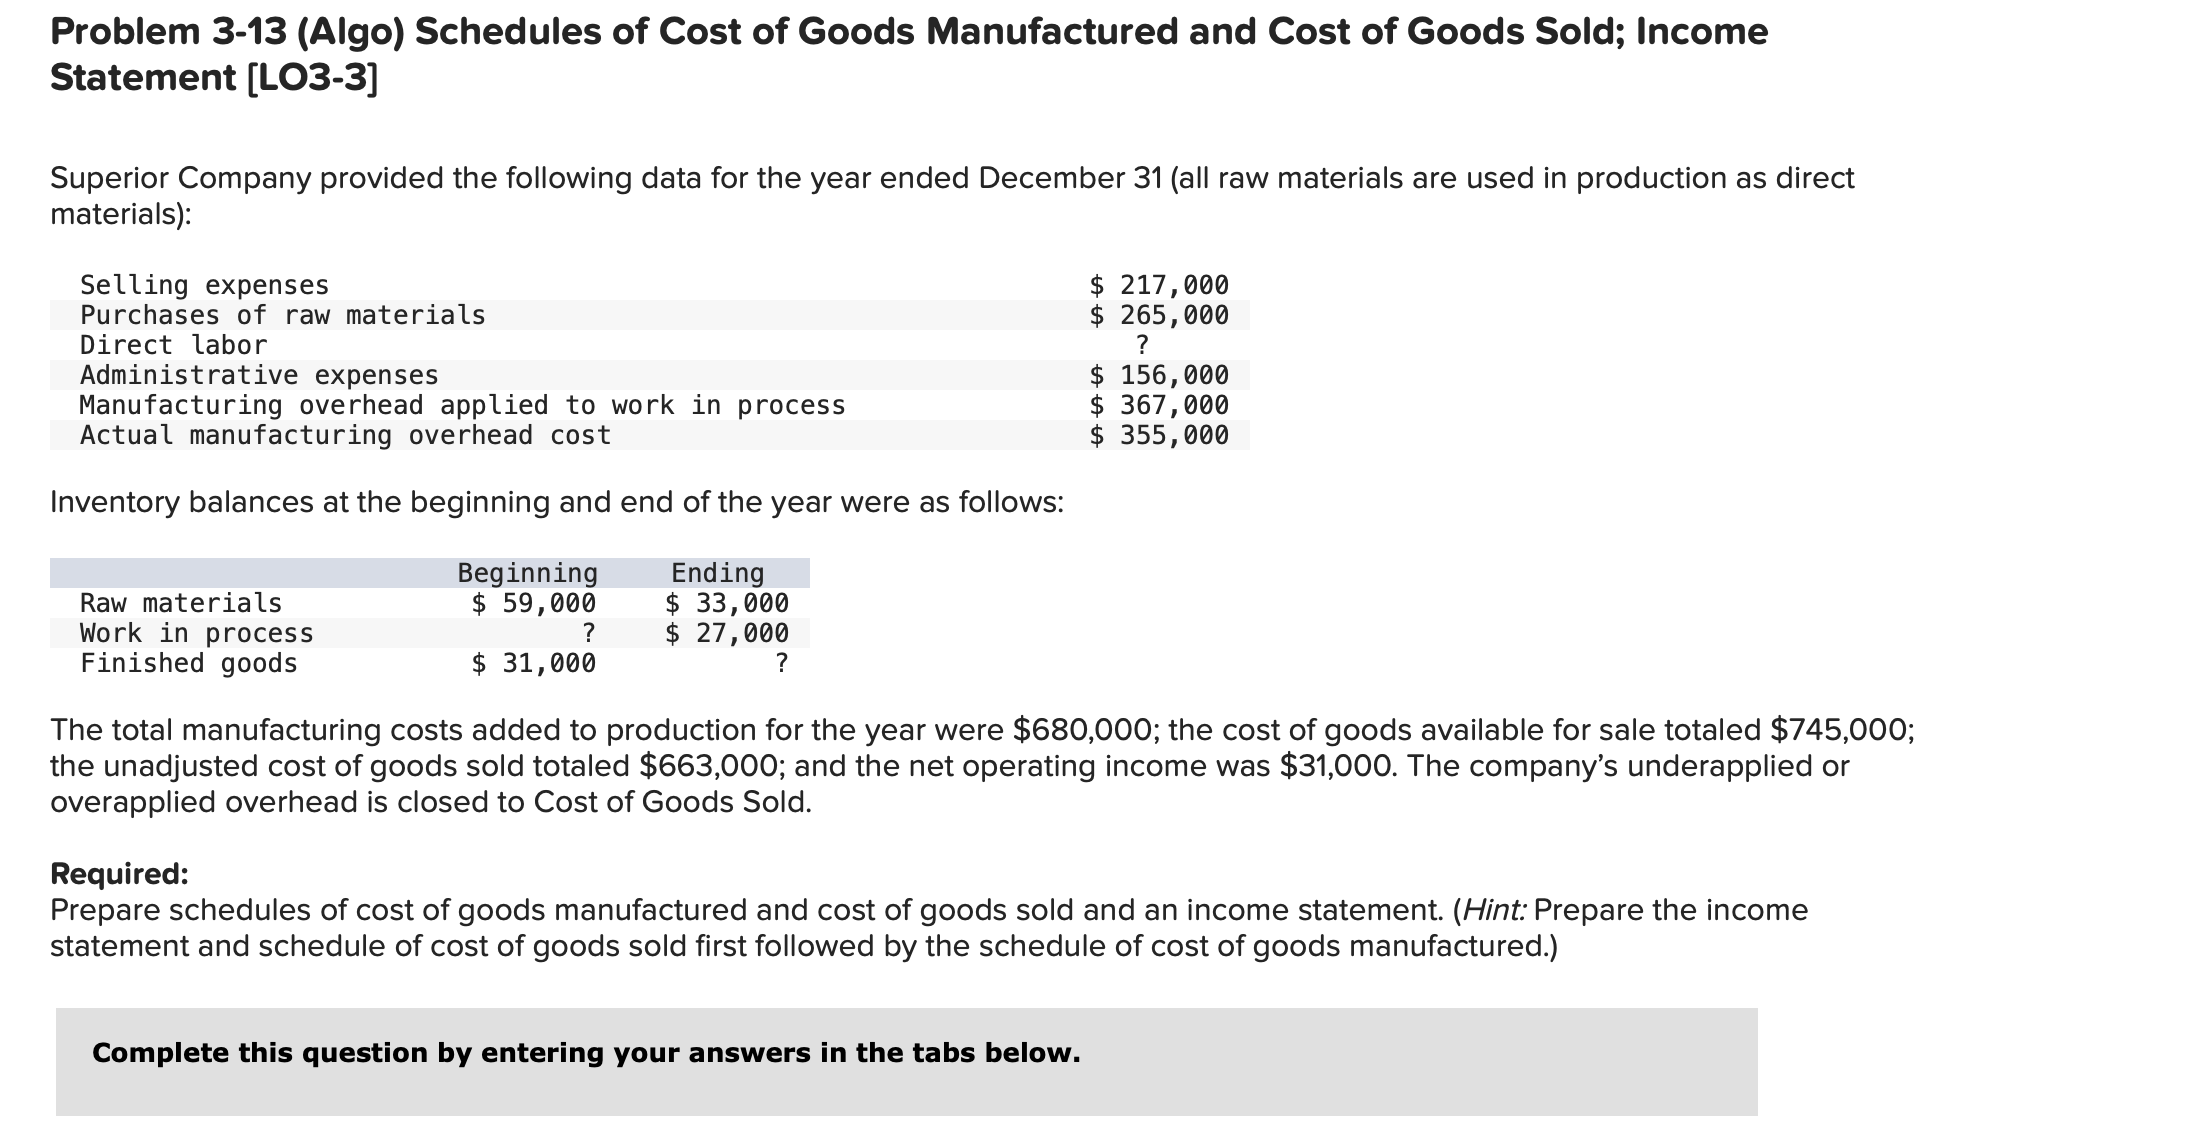 Problem 3-13 (Algo) Schedules of Cost of Goods Manufactured and Cost of Goods Sold; Income Statement [LO3-3]